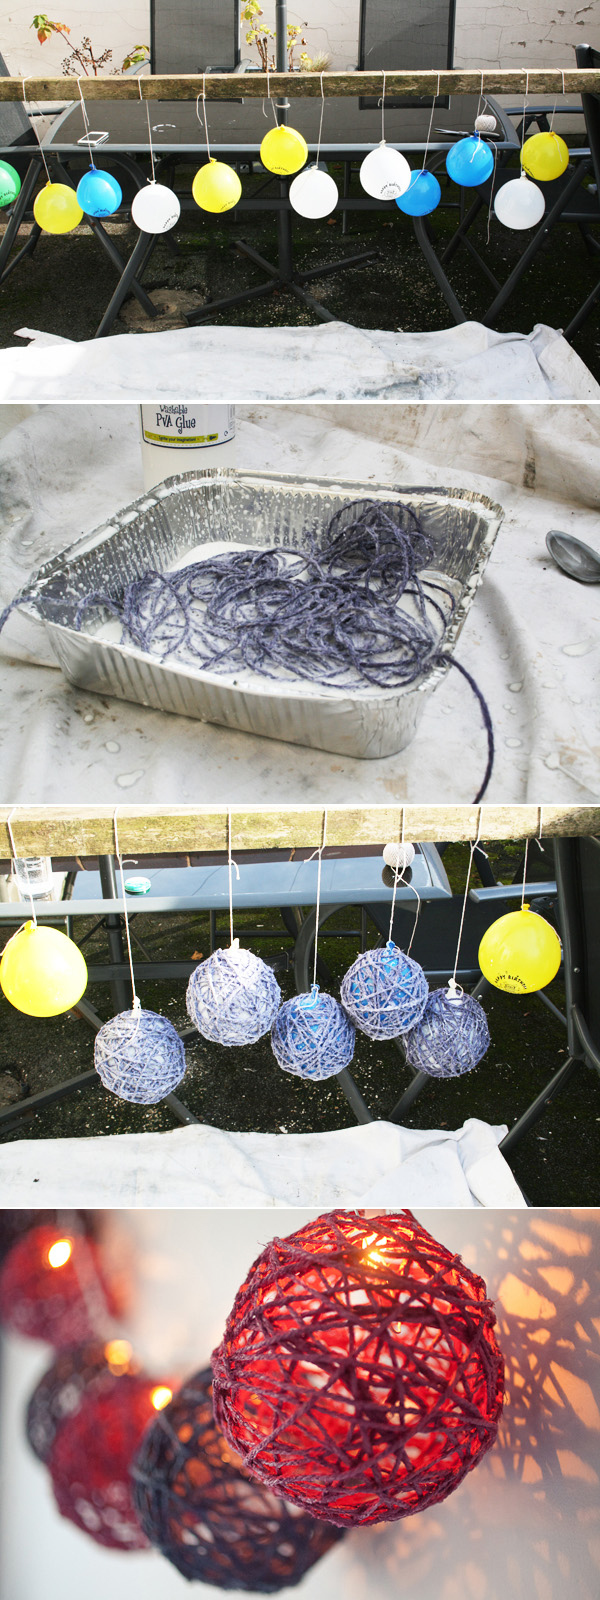 Create colorful twine balls to encase the lights.